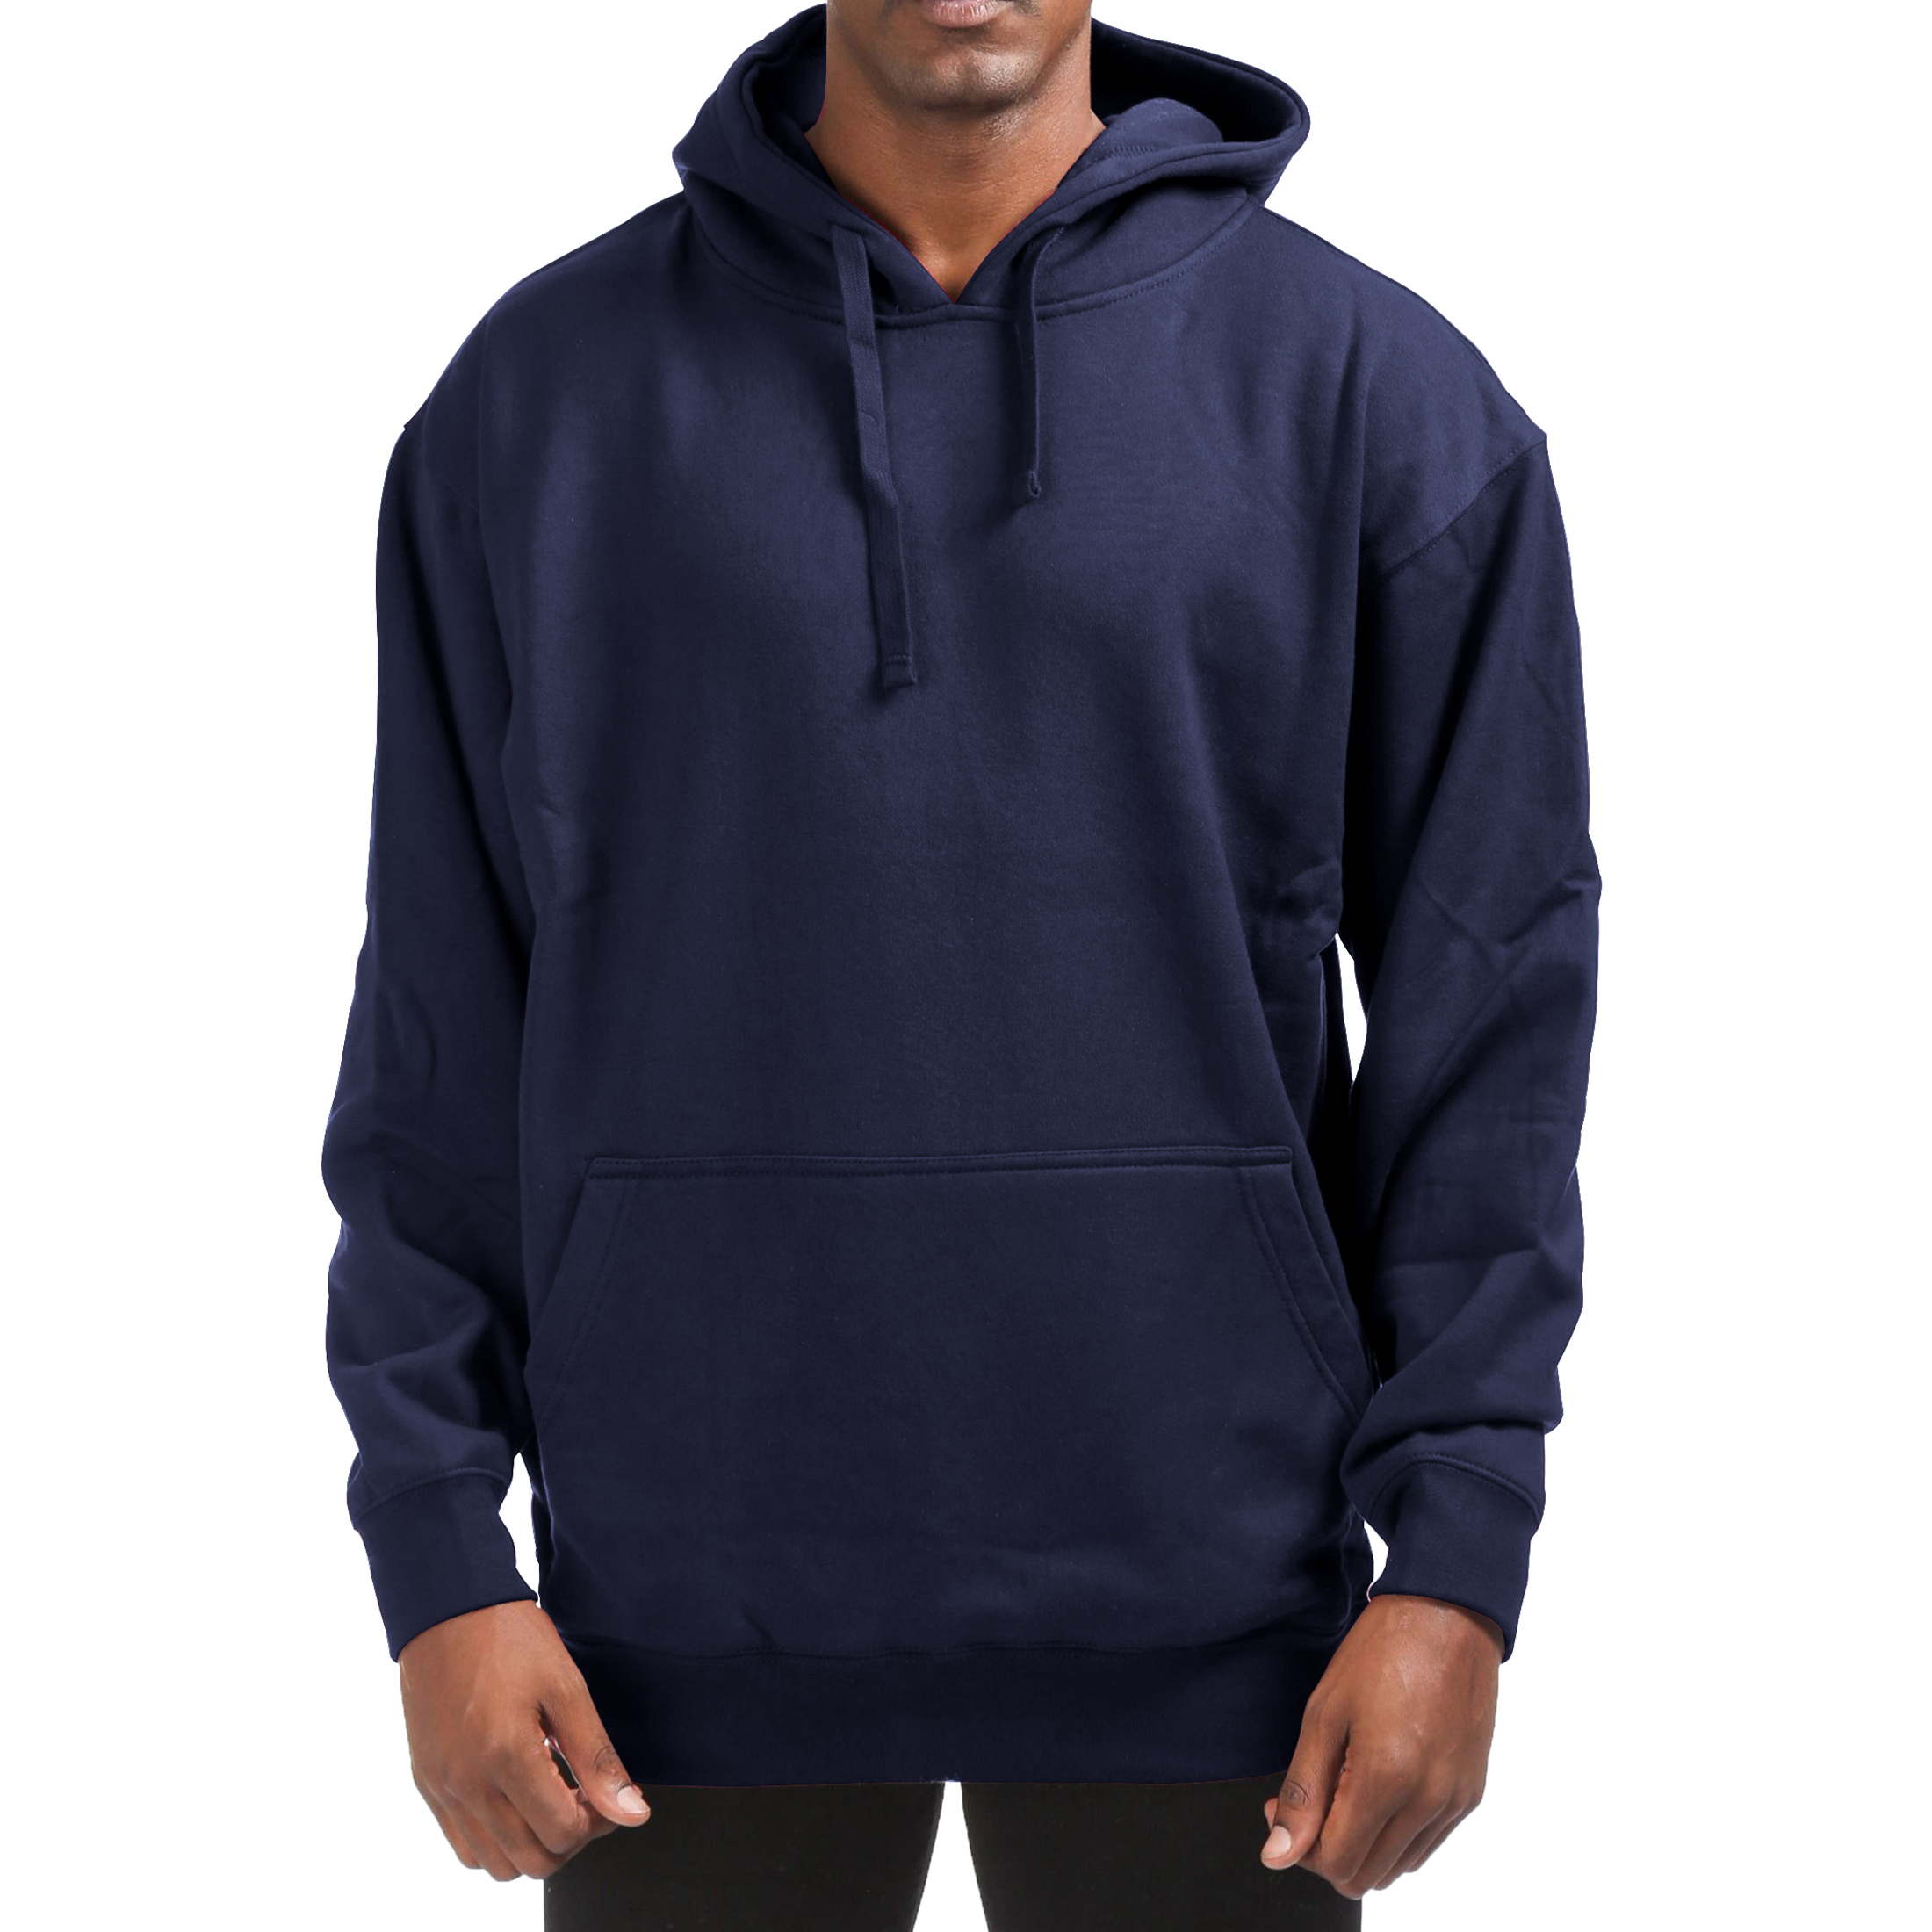 Men's Cotton-Blend Fleece Pullover Hoodie With Pocket (Big & Tall Sizes Available) - Navy, 4X-Large